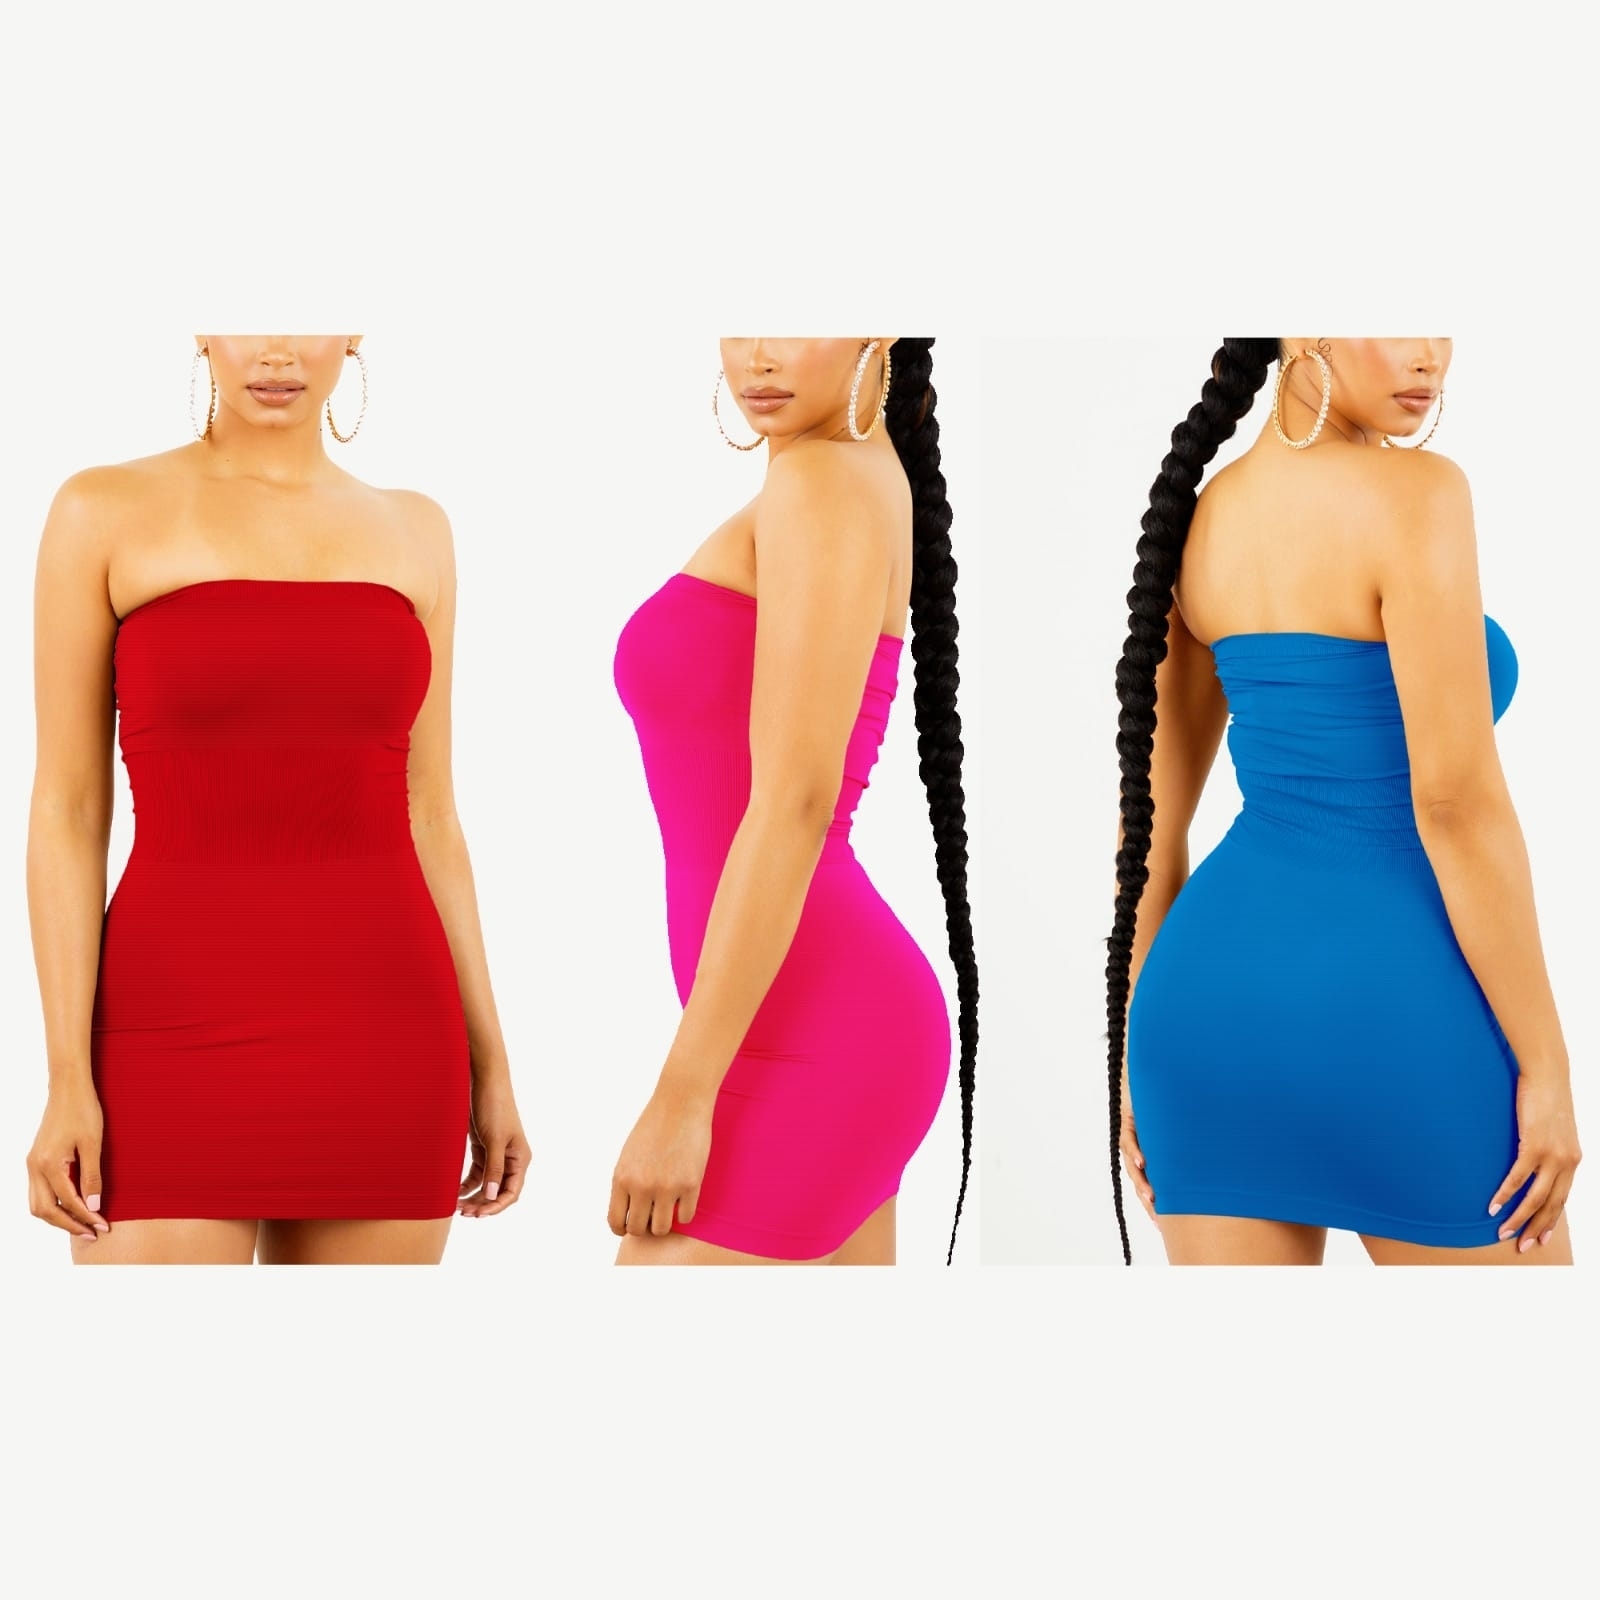 2-Pack Women's Strapless Stretchy Tight Fit Seamless Body Con Mini Tube Top Dress - PINK, M